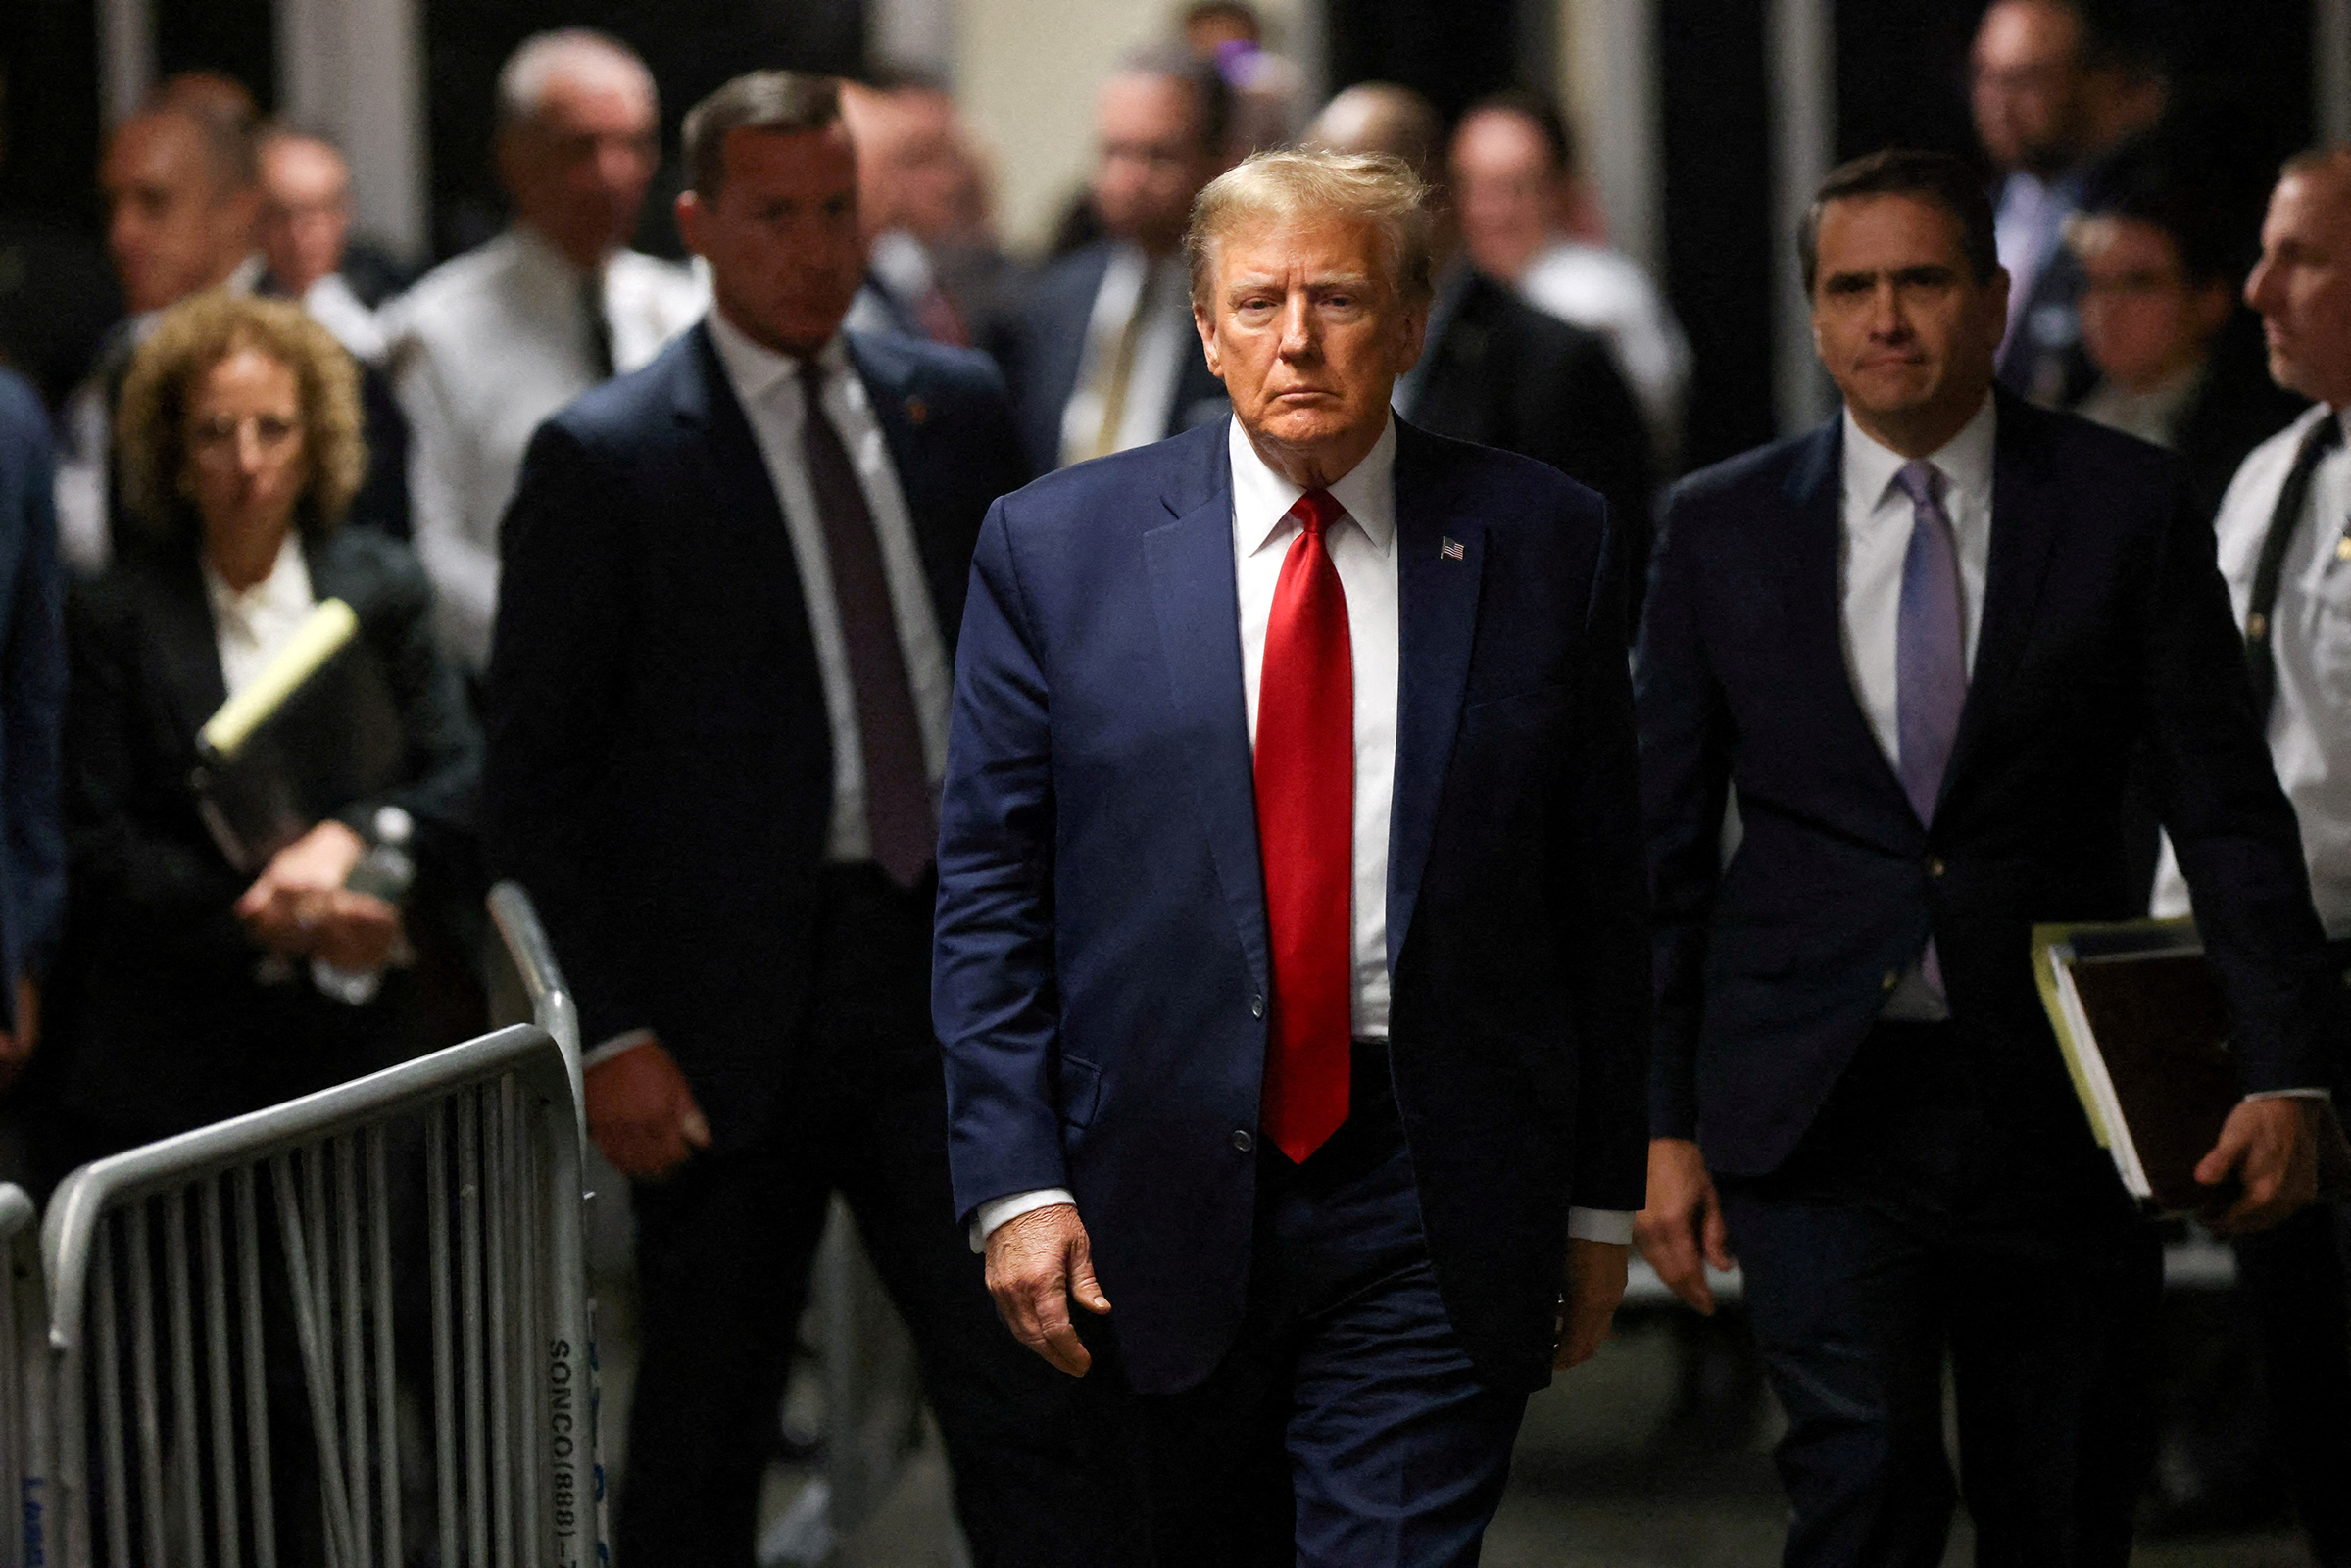 Former President Donald Trump walks outside the courtroom on the day of a court hearing on charges of falsifying business records to cover up a hush money payment to a porn star before the 2016 election, in New York State Supreme Court in February.